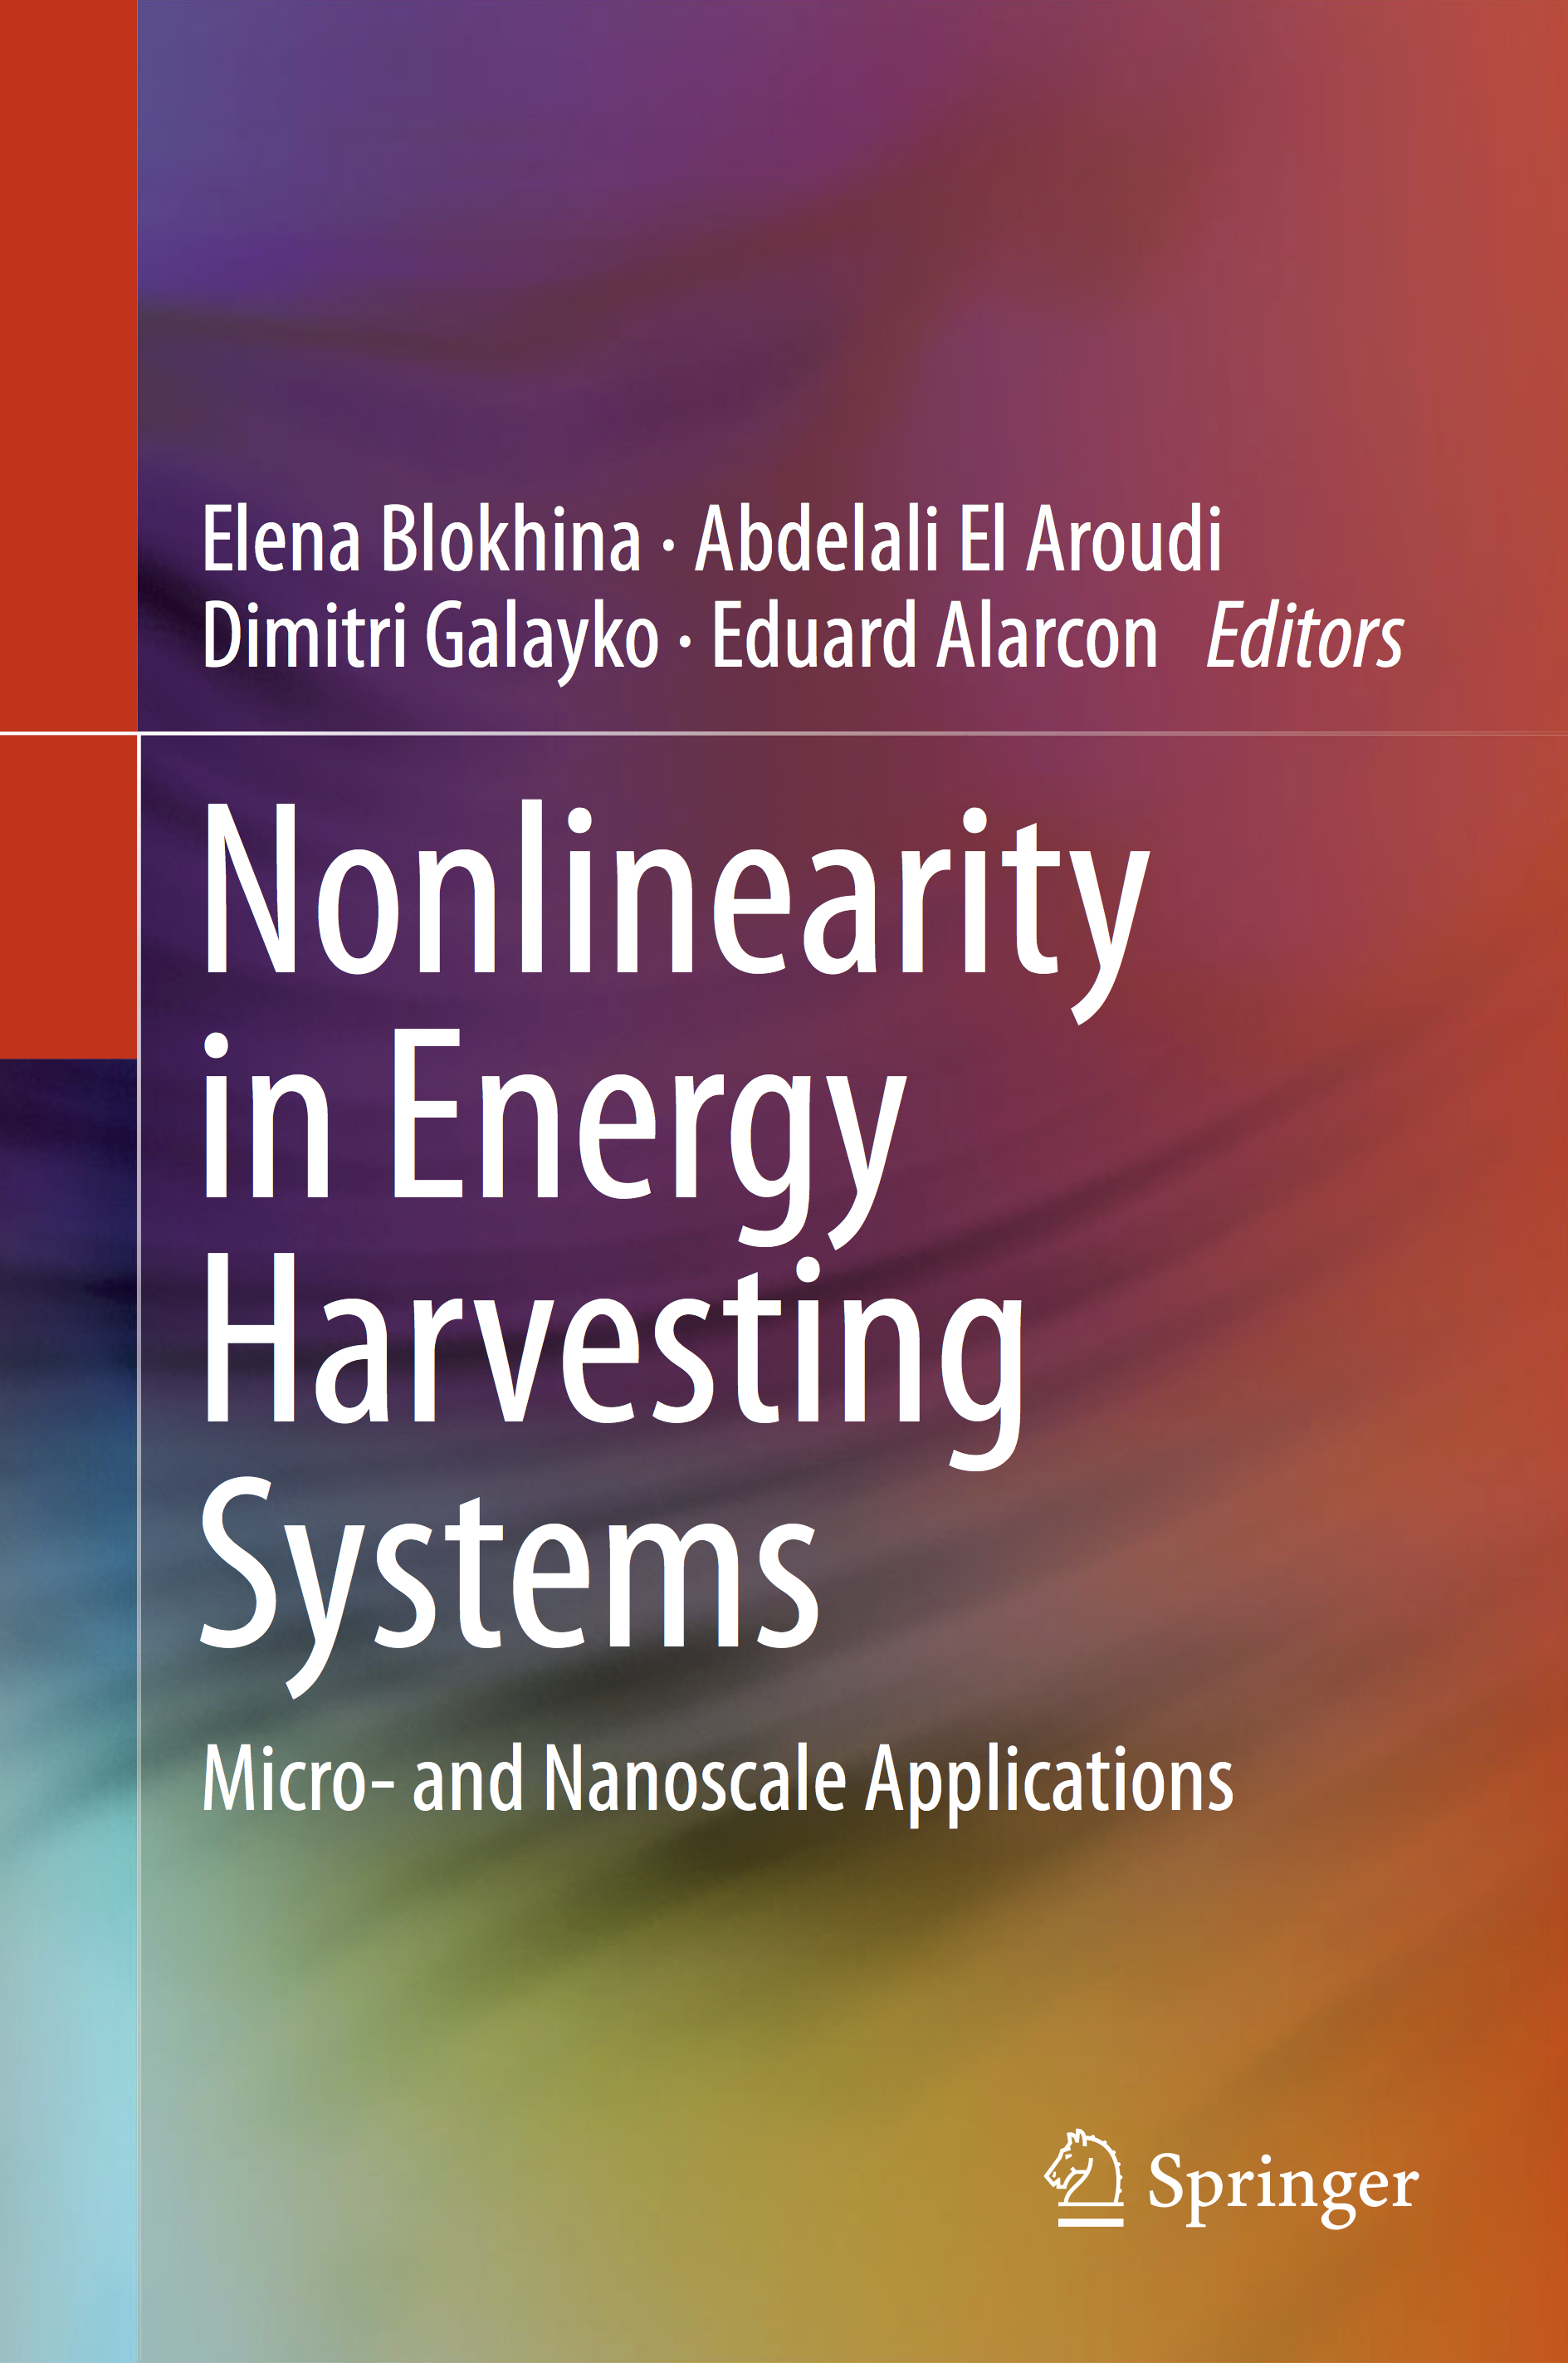 Nonlinearity in Energy Harvesting Systems book cover